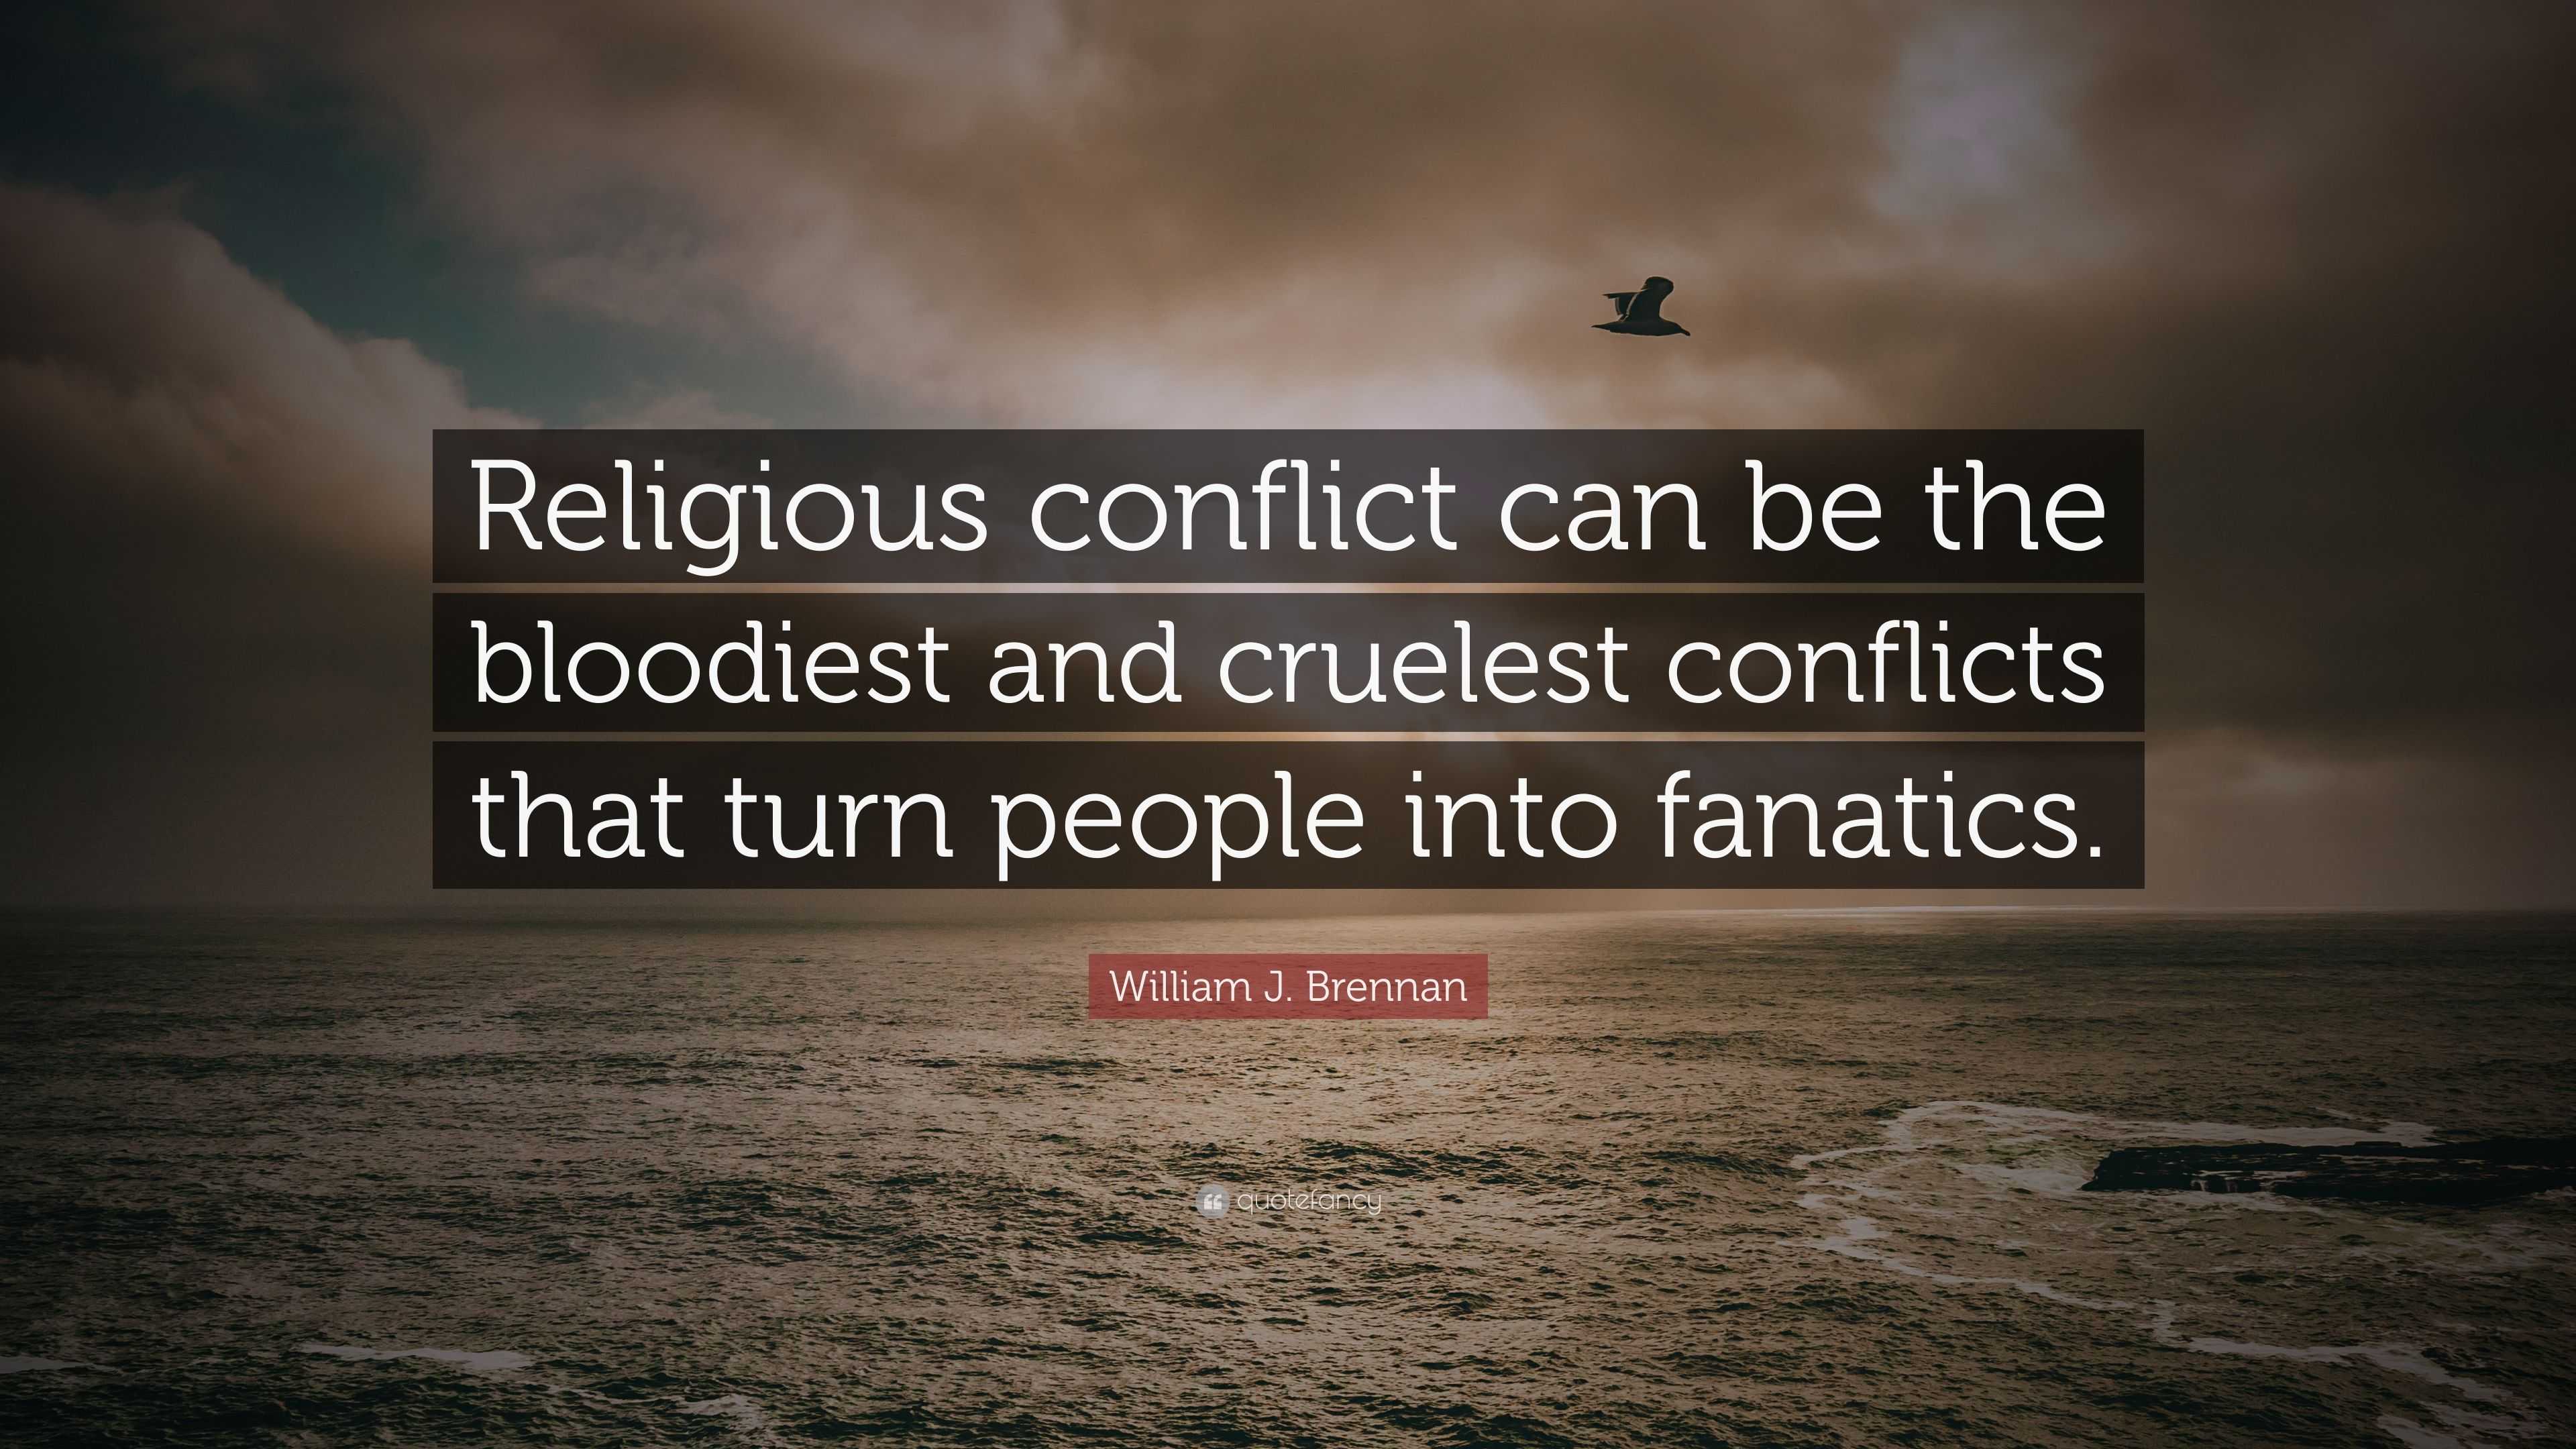 science and religion conflict quotes